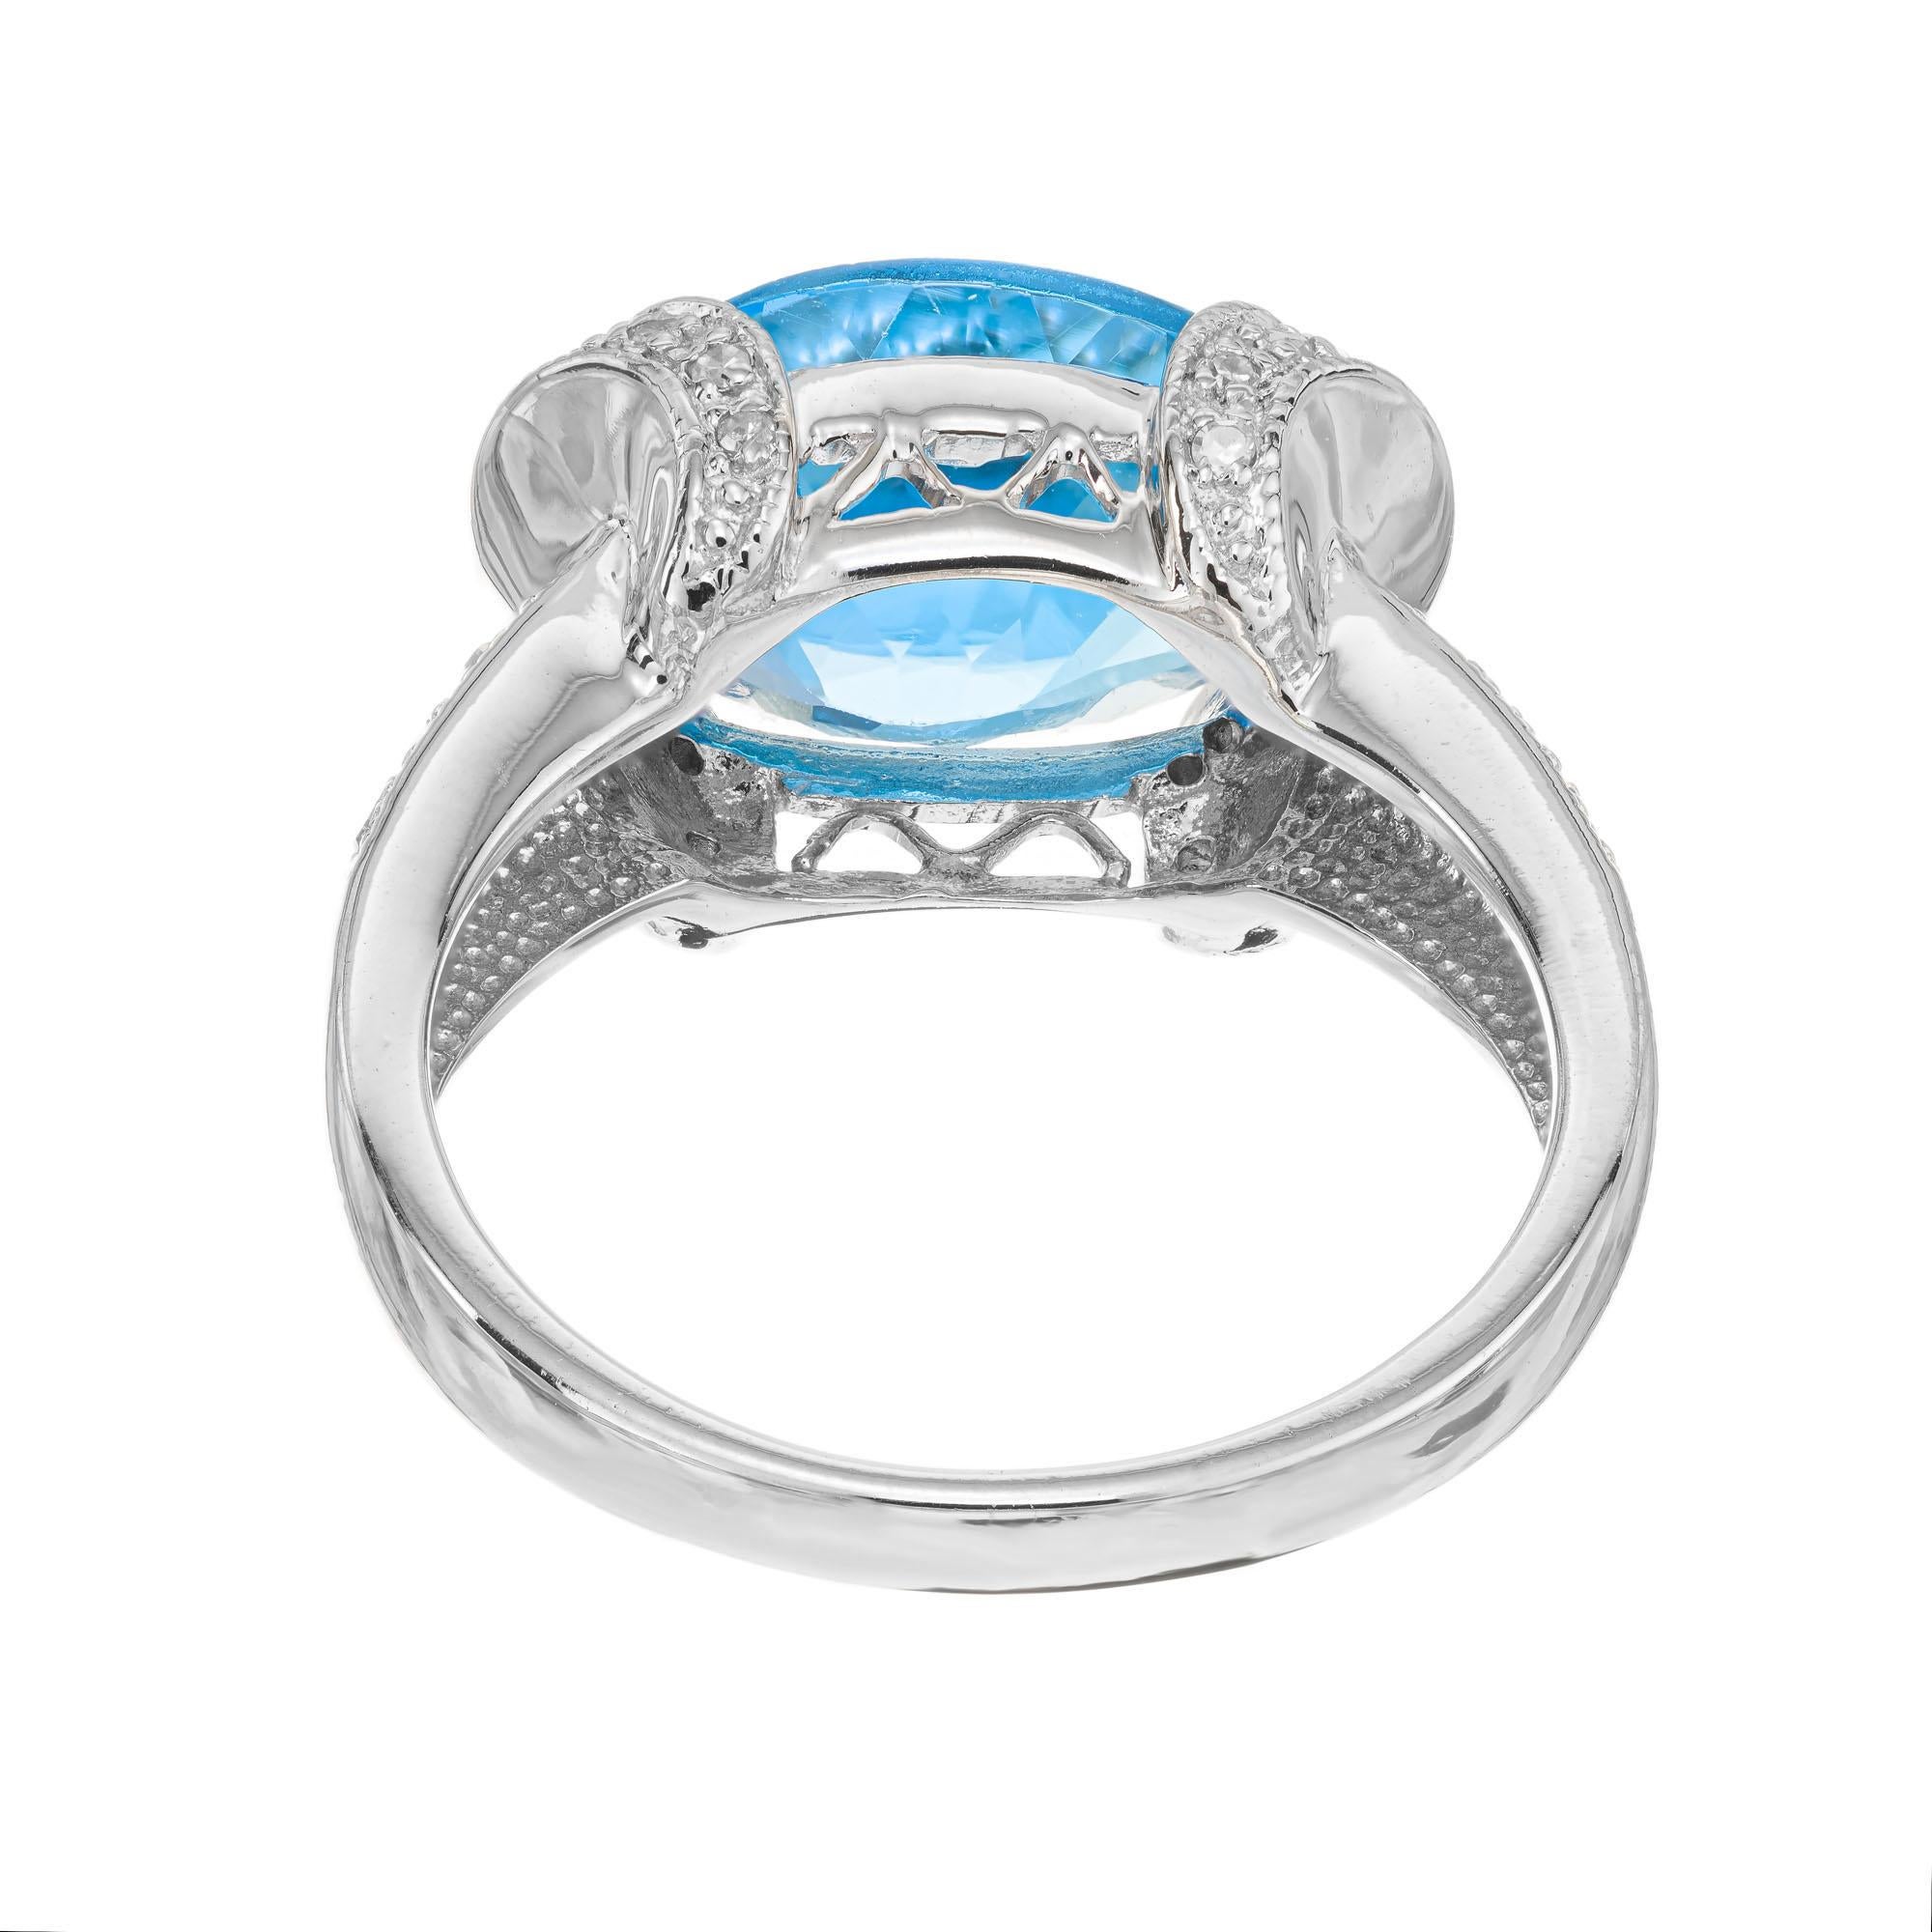 4.25 Carat London Blue Topaz White Gold Cocktail Ring In Excellent Condition For Sale In Stamford, CT